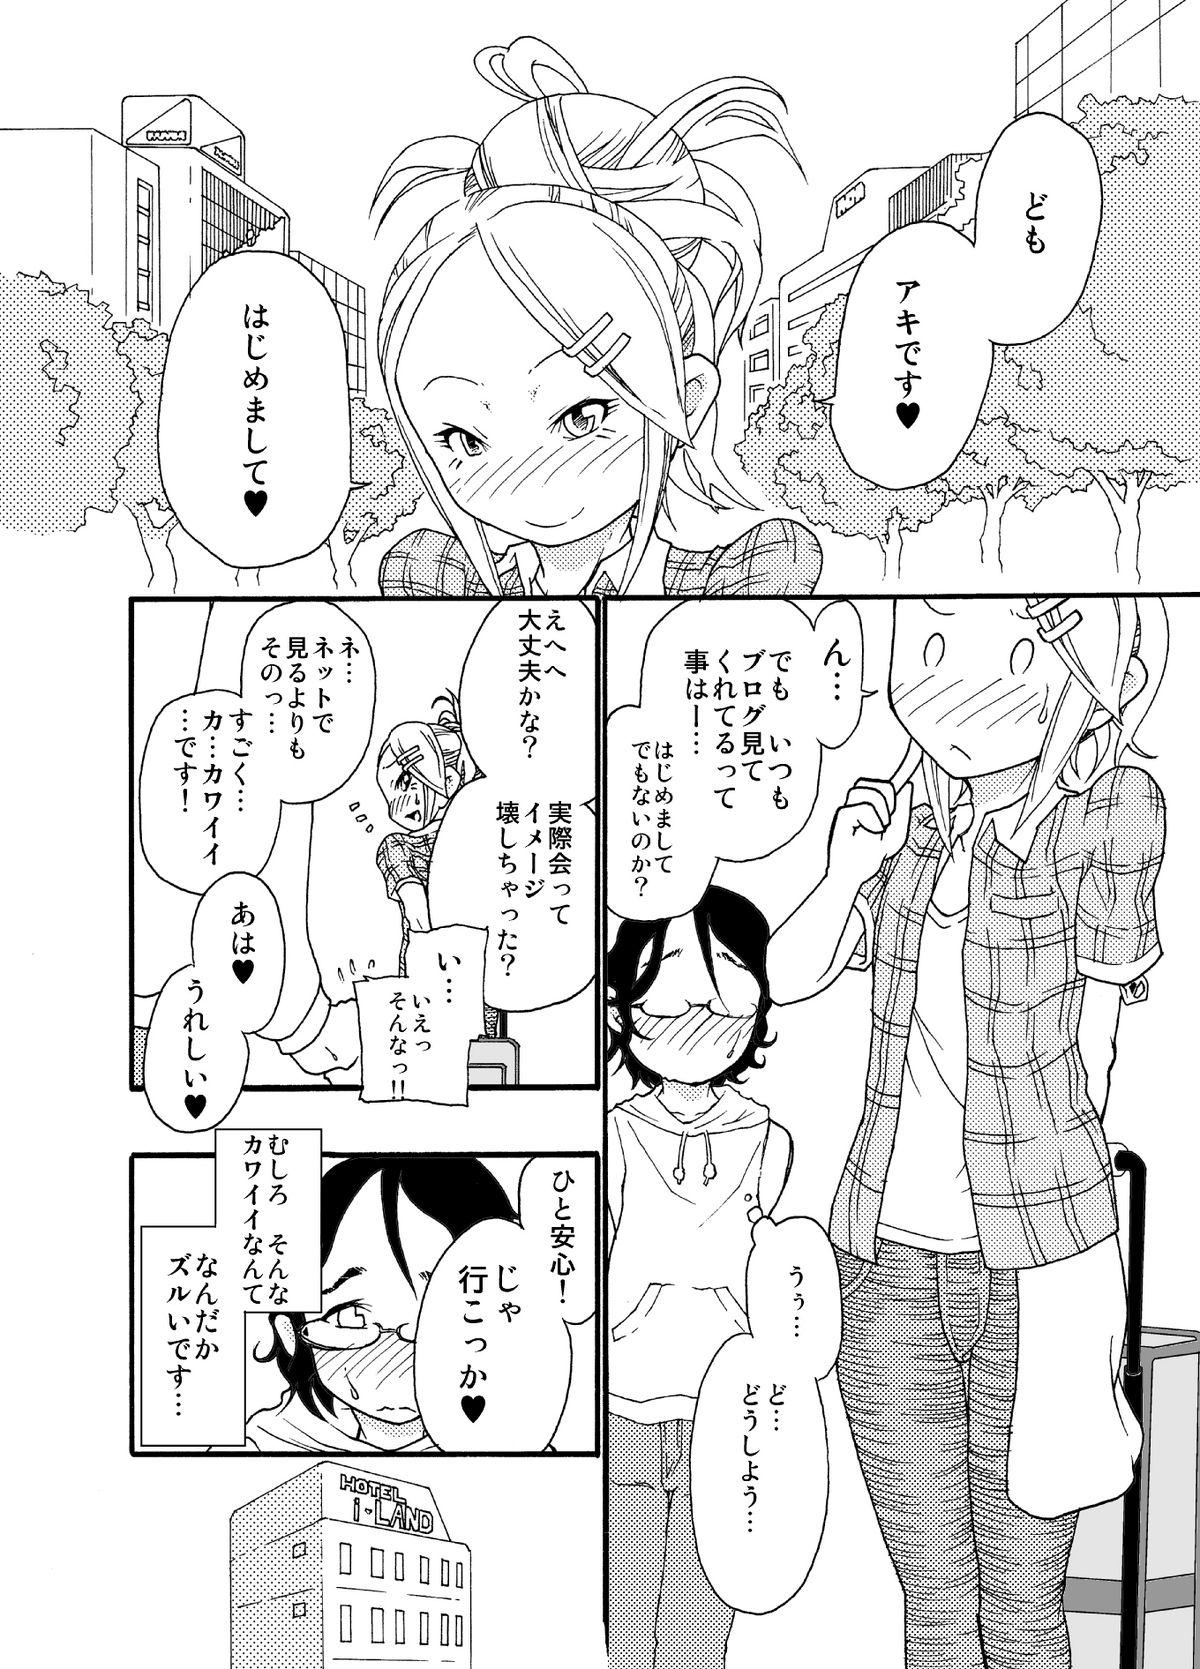 Tgirl 砂上の城・麗 Castle・imitation.0 Jerkoff - Page 7